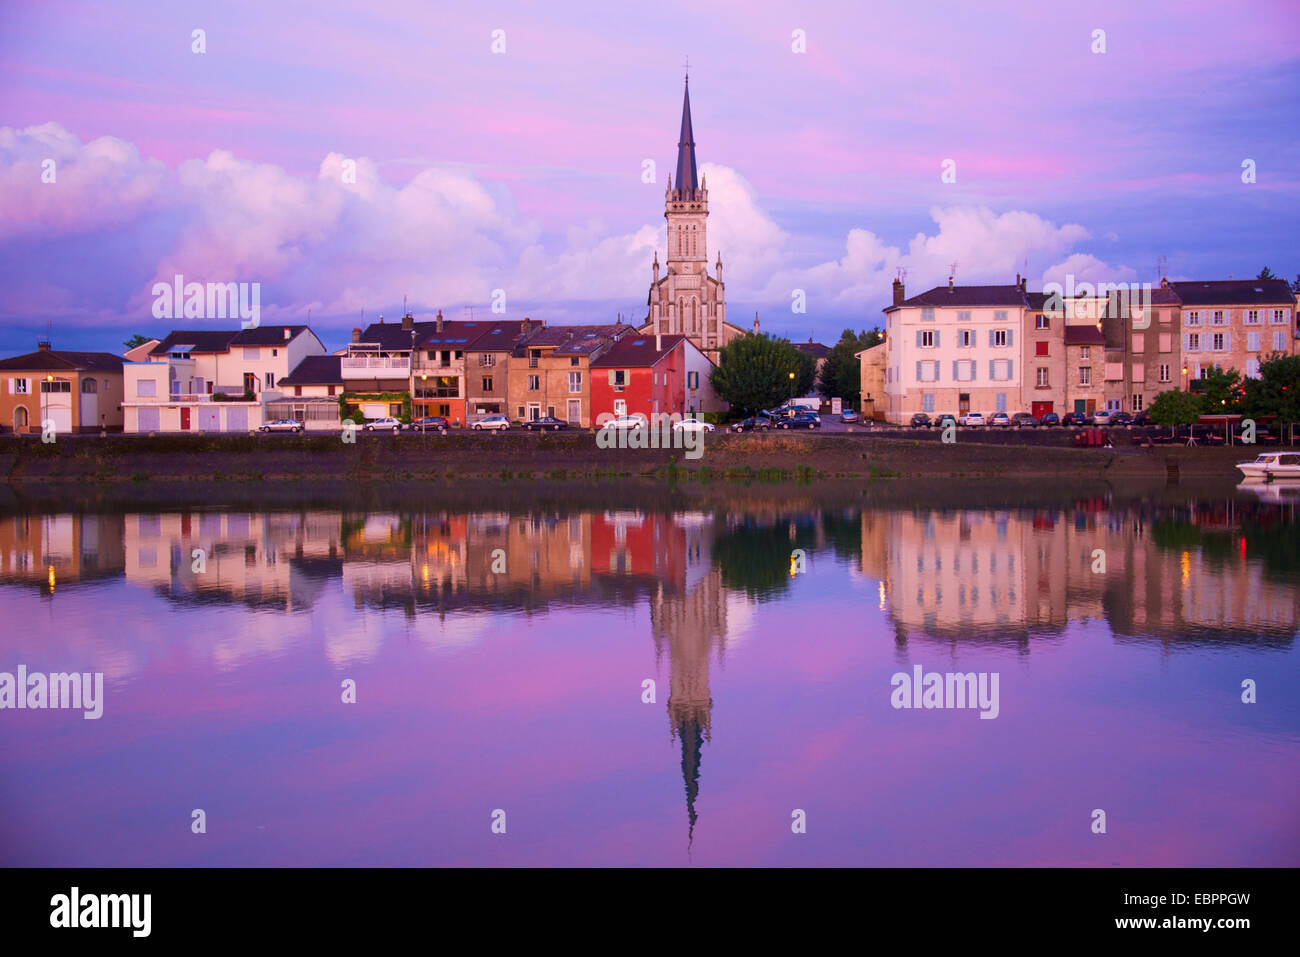 Yonne riverbanks at sunset, Auxerre, Yonne, Bourgogne (Burgundy), France, Europe Stock Photo